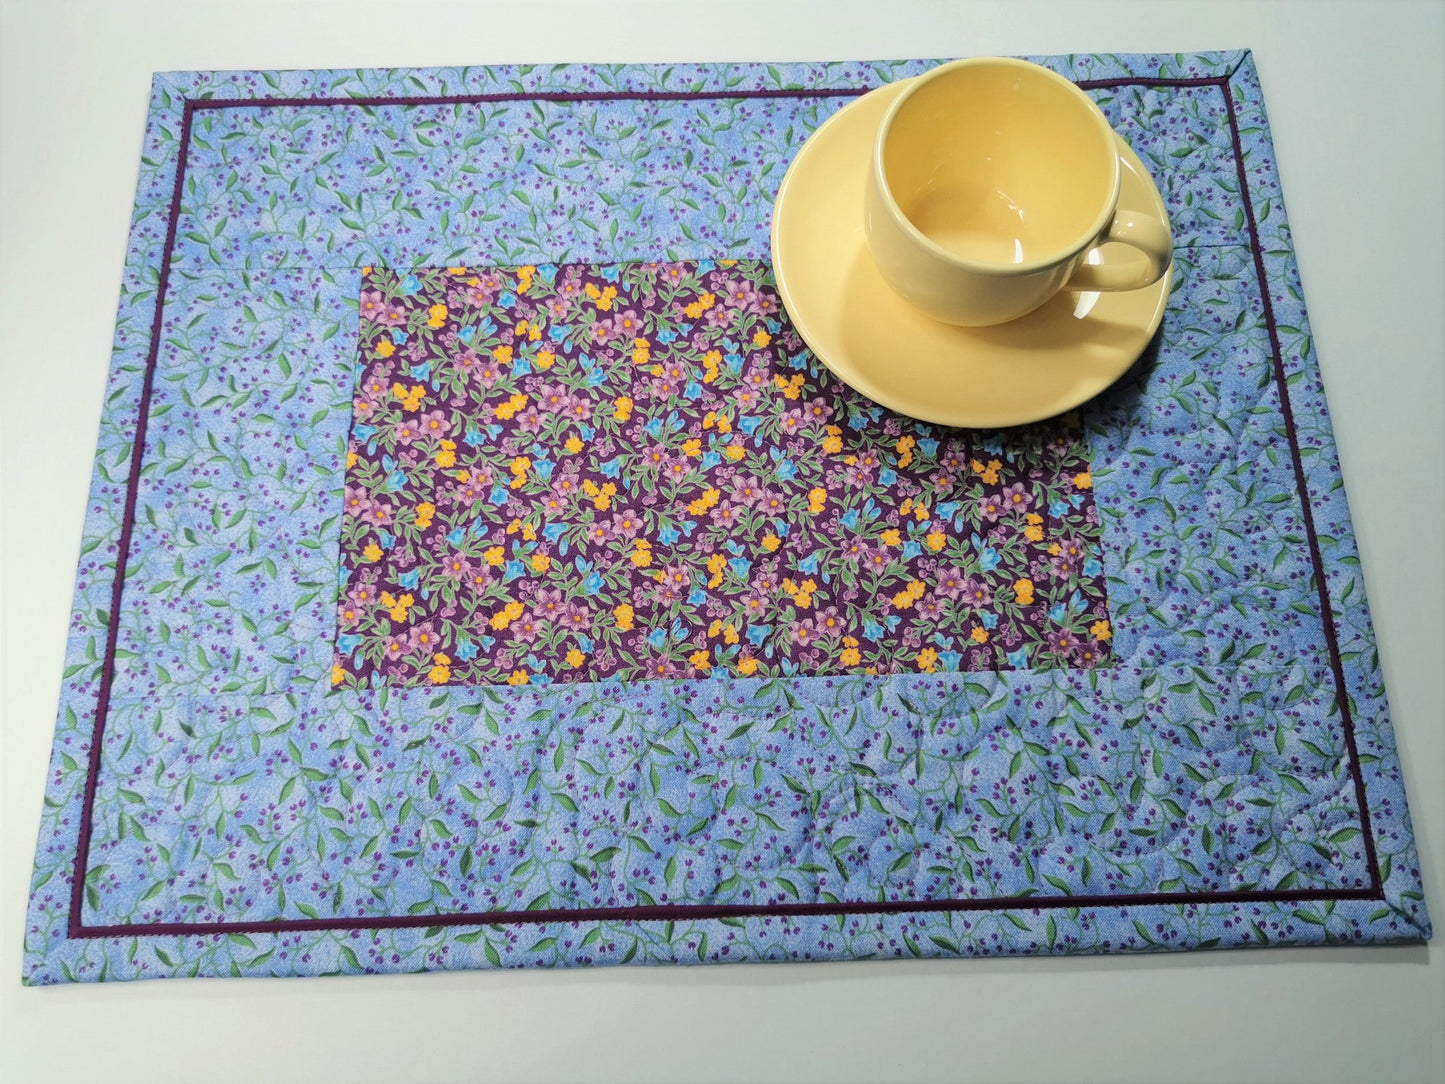 Overhead view of the placemat shown with a small yellow tea cup. The placemats are predominantly a pretty sky blue with purple as a secondary color. The purple floral print in the center has golden yellow flowers scattered throughout. A key feature of the placemats is the flanged binding which gives a pretty framing effect.